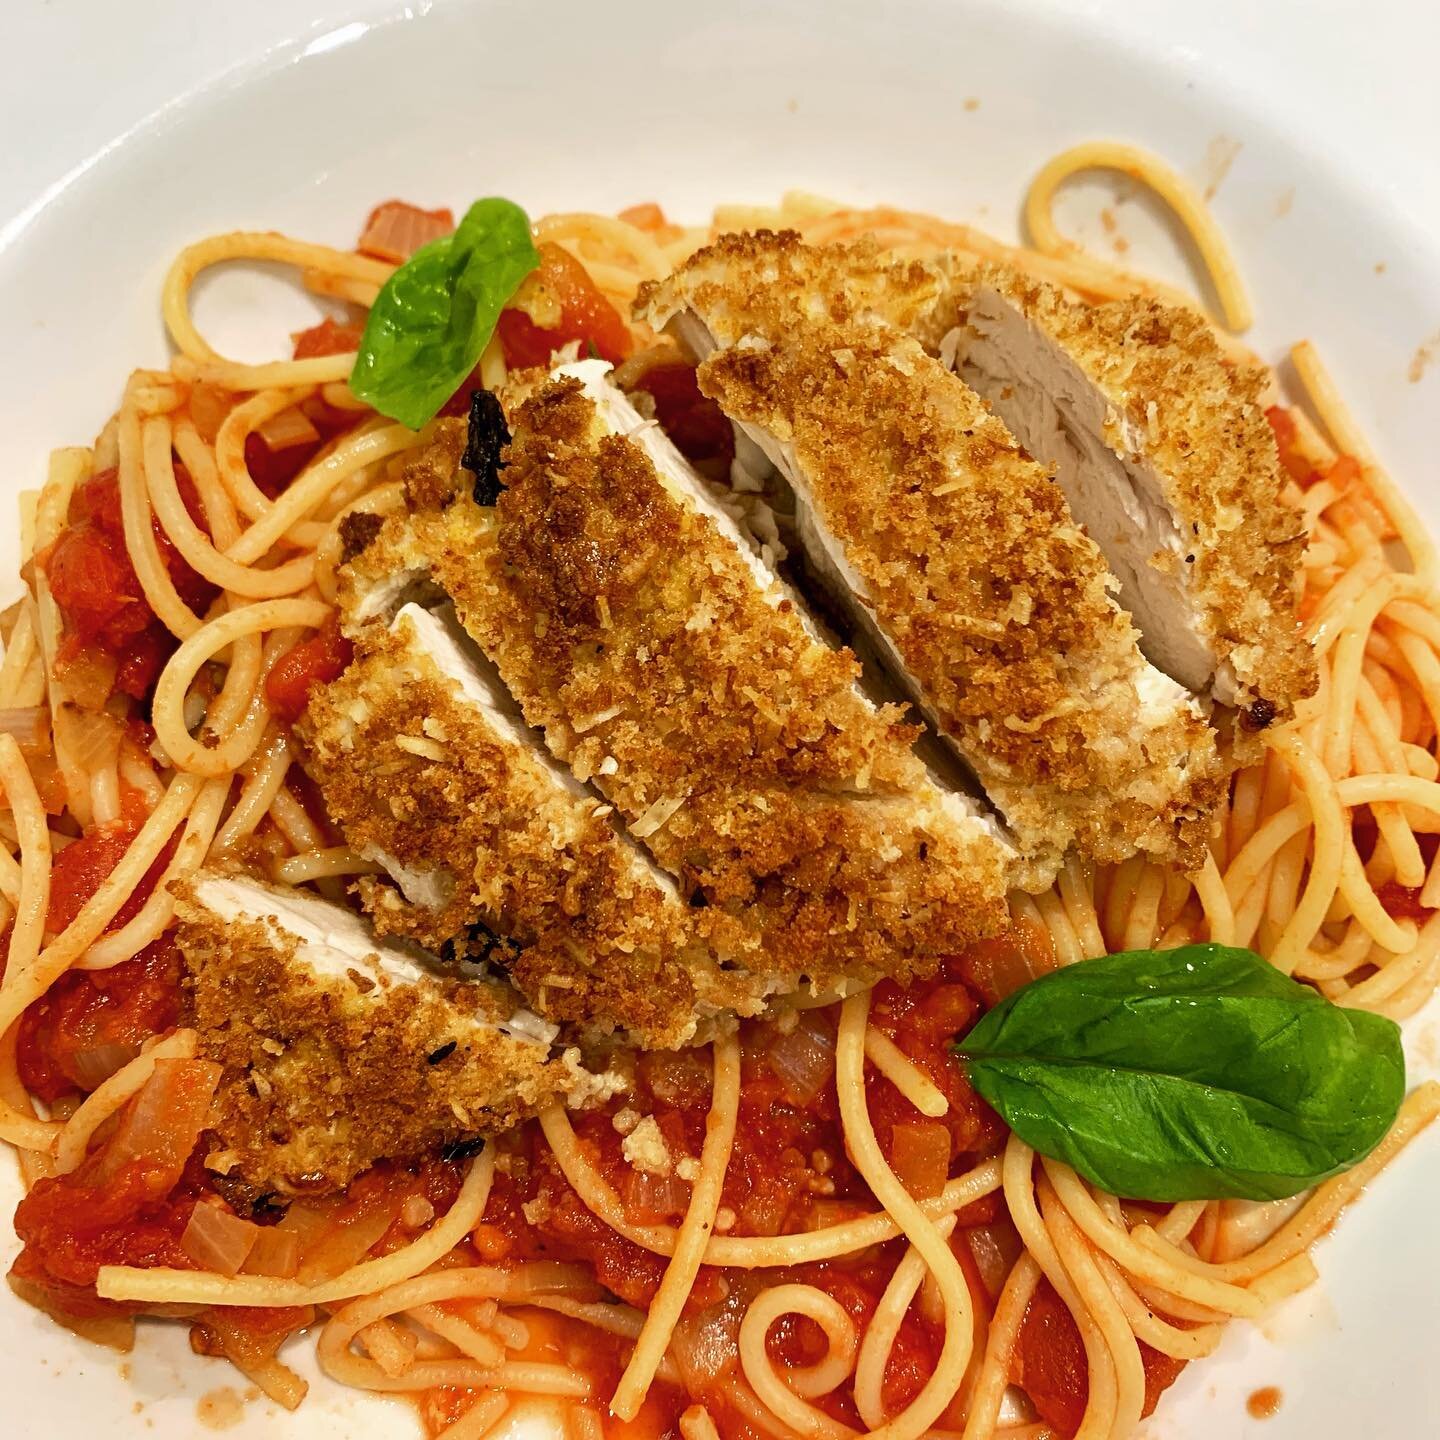 My tiny tums cannot get enough of this @pinchofnom Chicken Milanese with spaghetti Pomodoro.
Using @barilla sans gluten spaghetti. 
I always blend the loaf crusts to make gluten-free breadcrumbs and freeze until I need them.
.
#GF #glutenfree #noglut